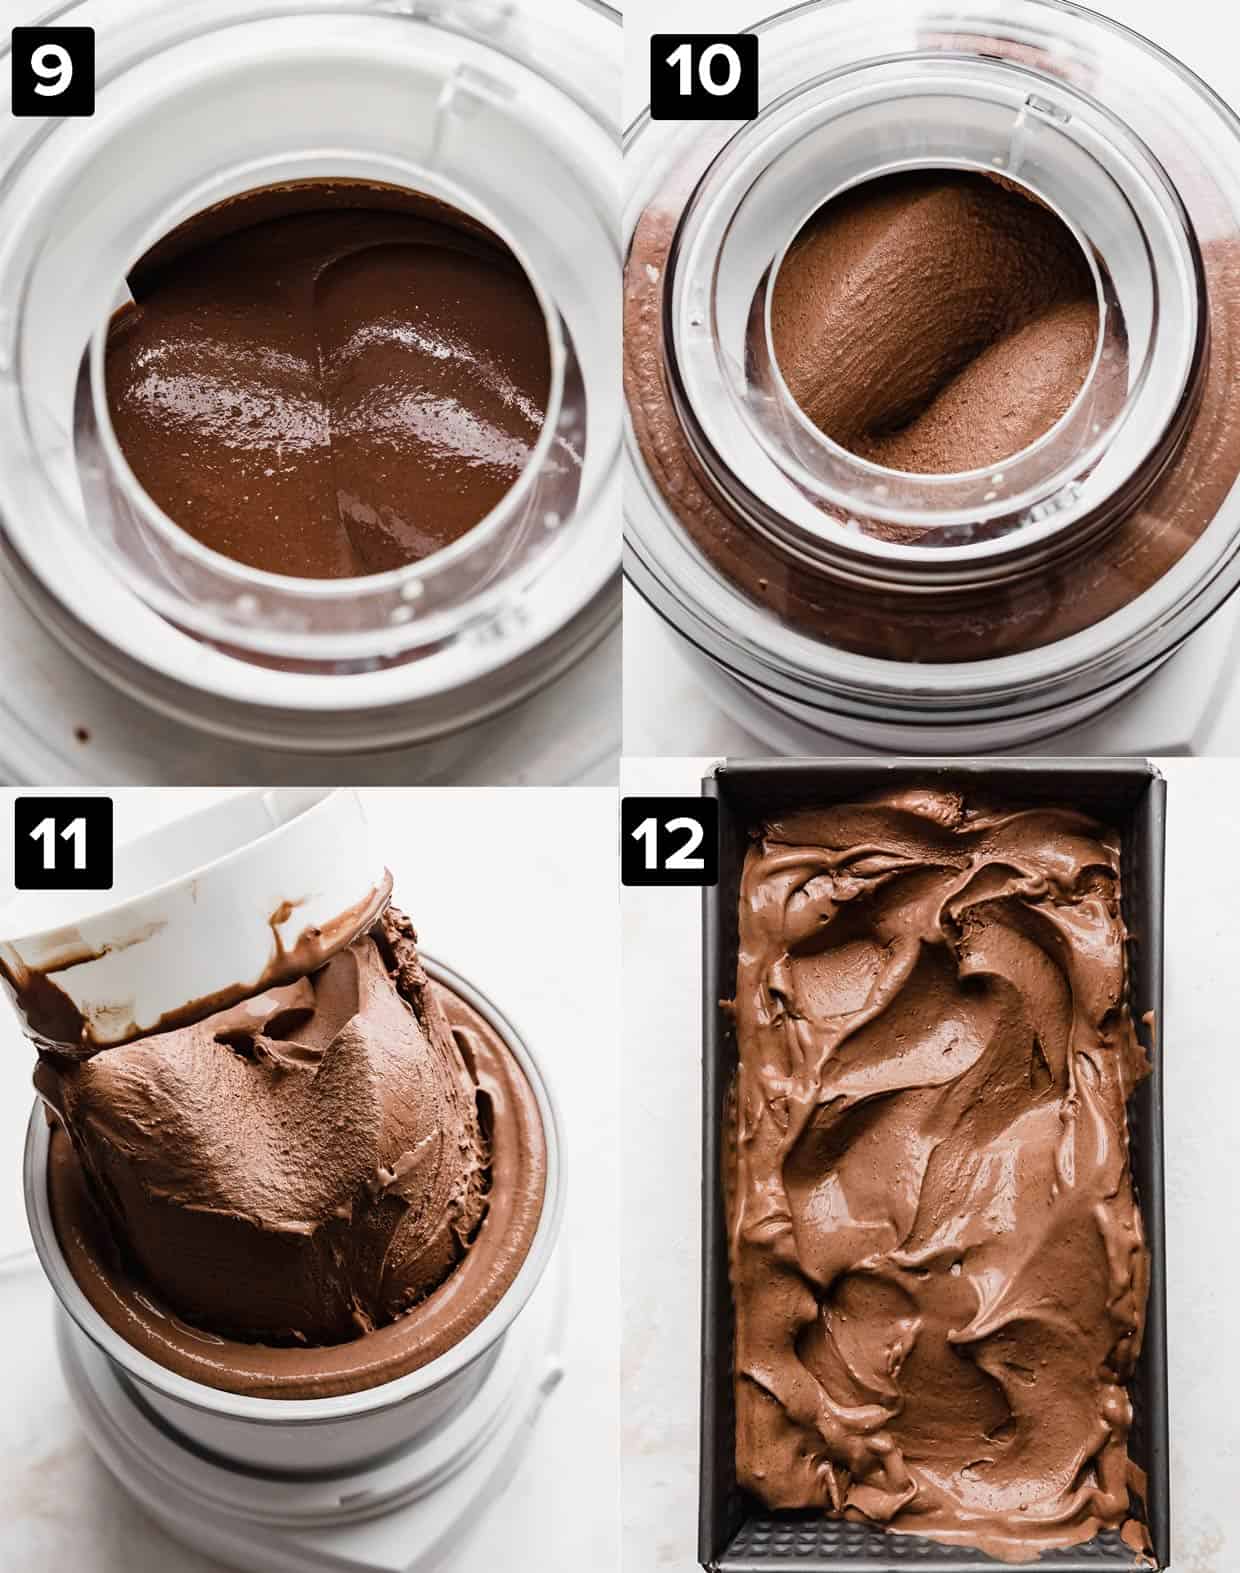 Four images showing how to make a creamy chocolate ice cream that is custard based, with an ice cream maker. 